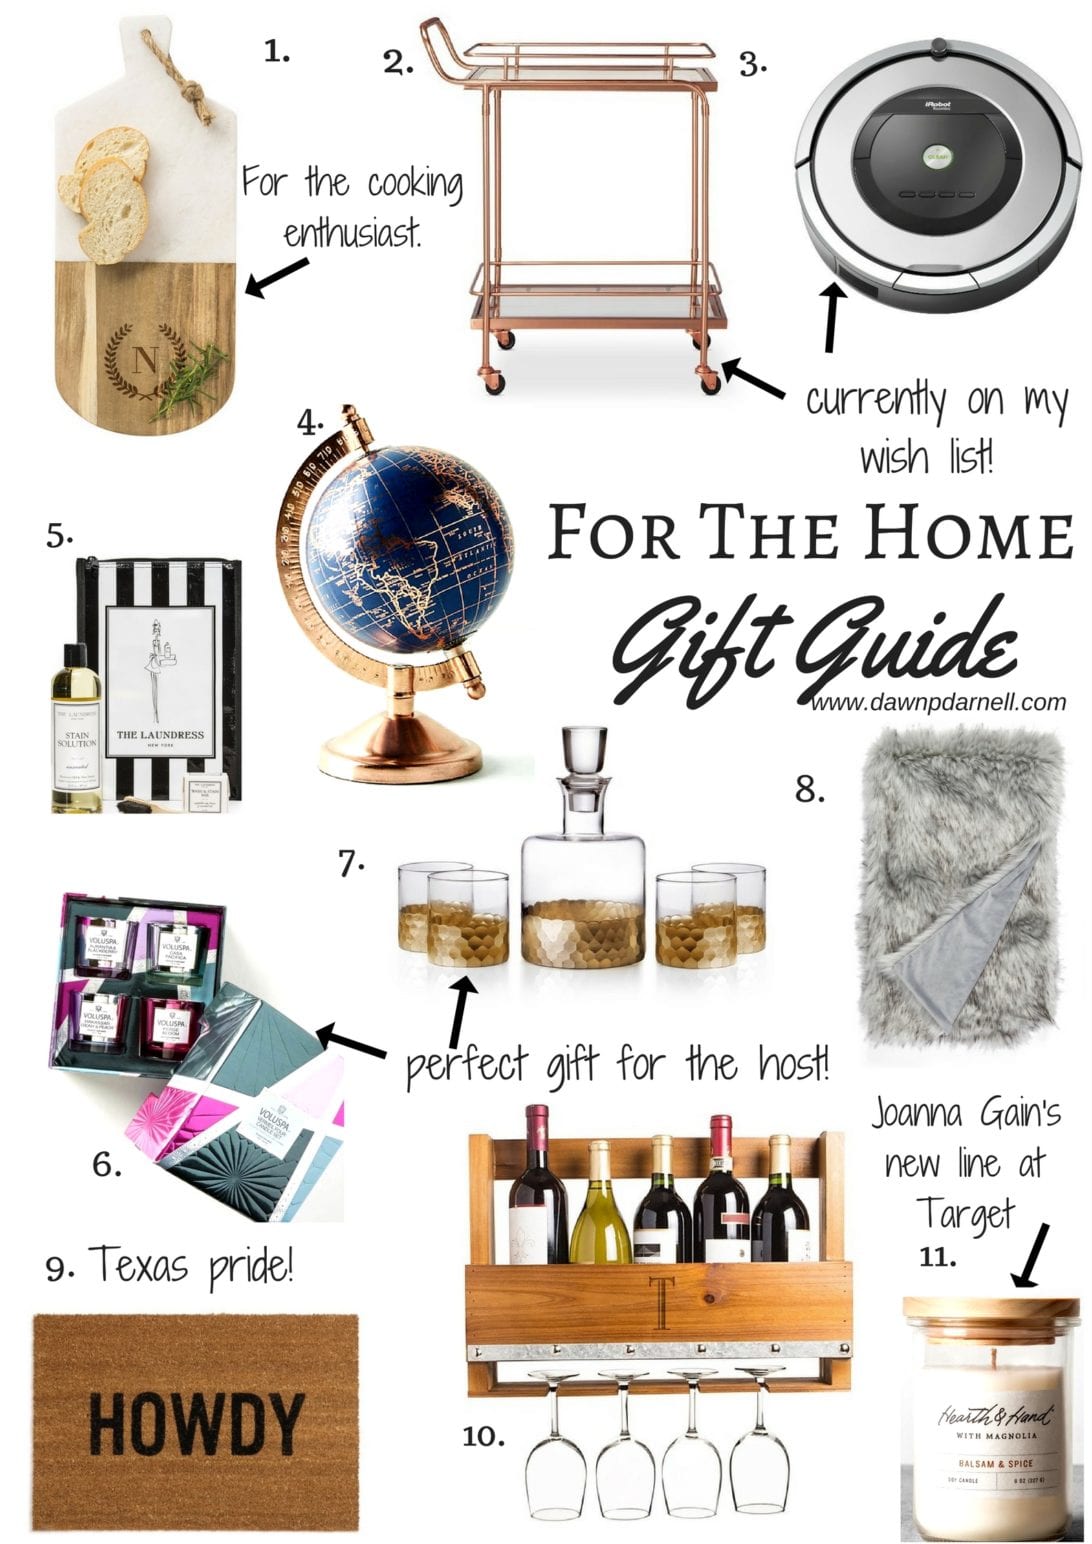 Gift ideas for the home, home gift guide, christmas gift guide, Monogram Marble & Wood Serving Board, Metal, Glass, and Leather Bar Cart, Roomba® 860 Robotic Vacuum, Decorative Globe, Stain Removal Kit, Voluspa Maison Mini Candle Gift Set, 'Daphne' Decanter & Whiskey Glasses, Fox Faux Fur Throw Blanket, 'Howdy' Doormat, Personalized Rustic Wall Wine Rack & Glass Holder, Hearth & Hand with Magnolia Lidded Candle